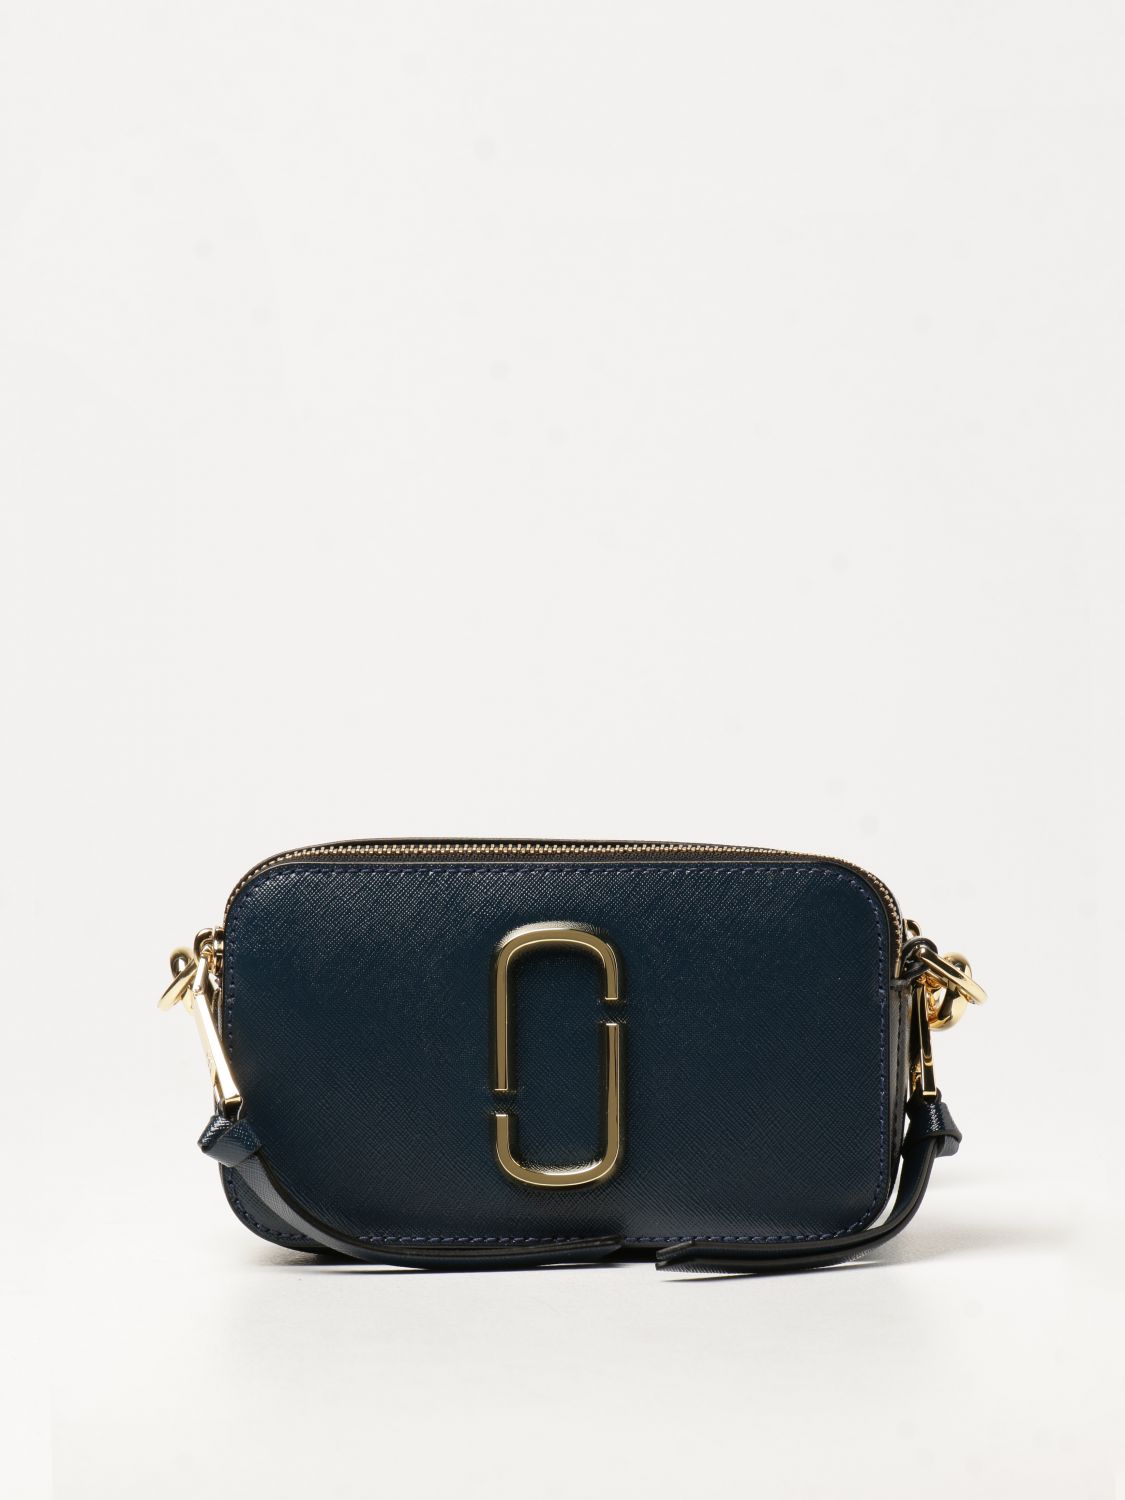 MARC JACOBS: The Logo Strap Snapshot bag in saffiano leather - Blue